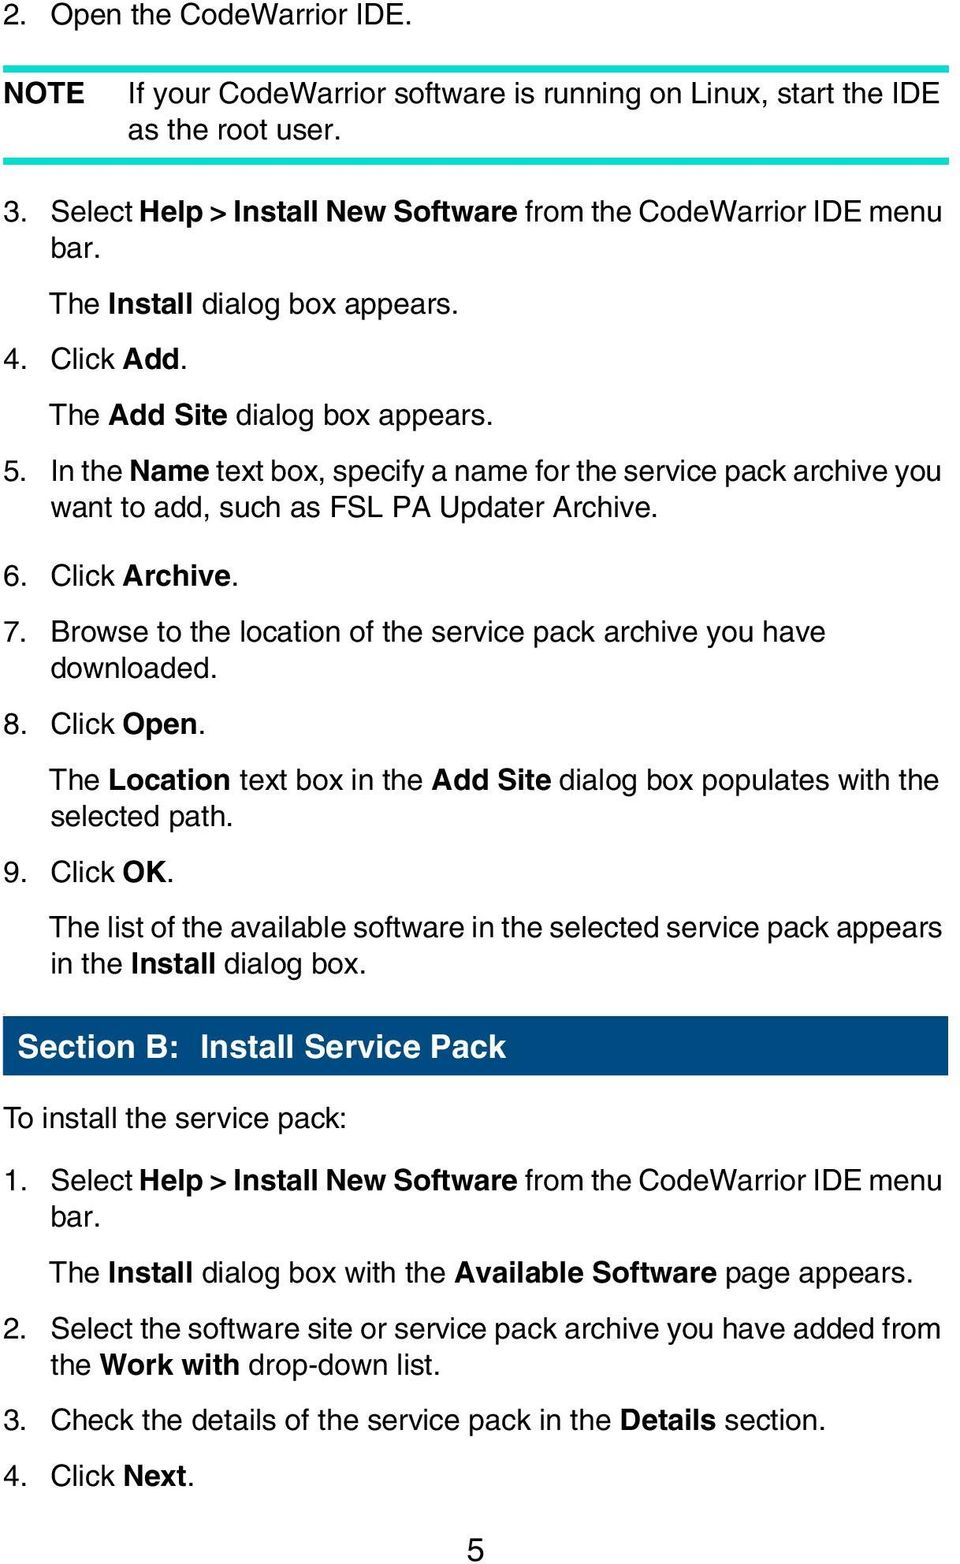 Click Archive. 7. Browse to the location of the service pack archive you have downloaded. 8. Click Open. The Location text box in the Add Site dialog box populates with the selected path. 9. Click OK.